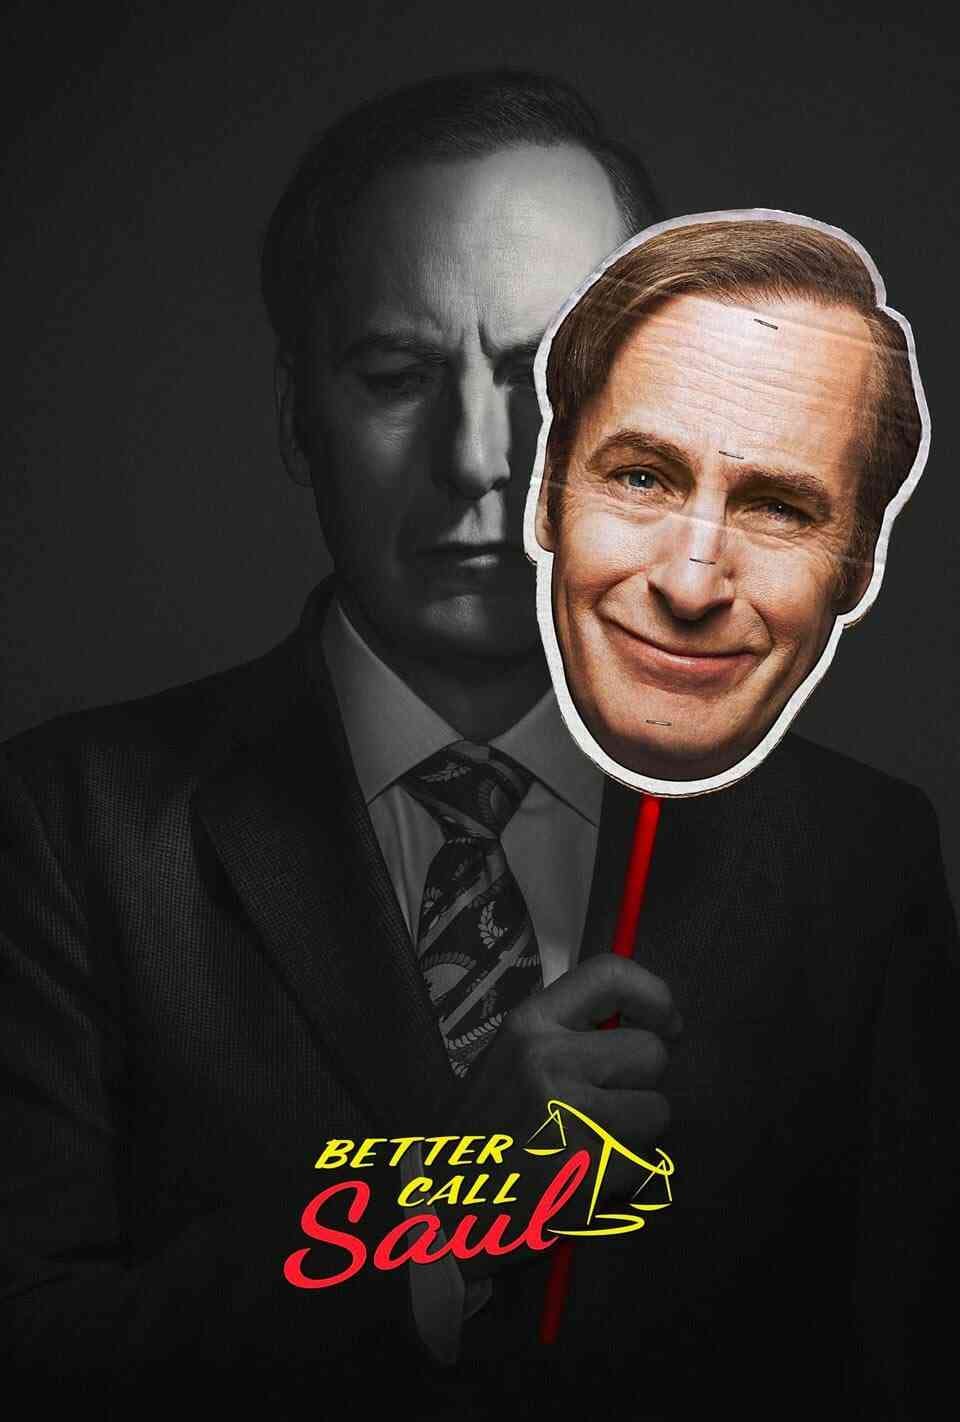 Read Better Call Saul screenplay (poster)